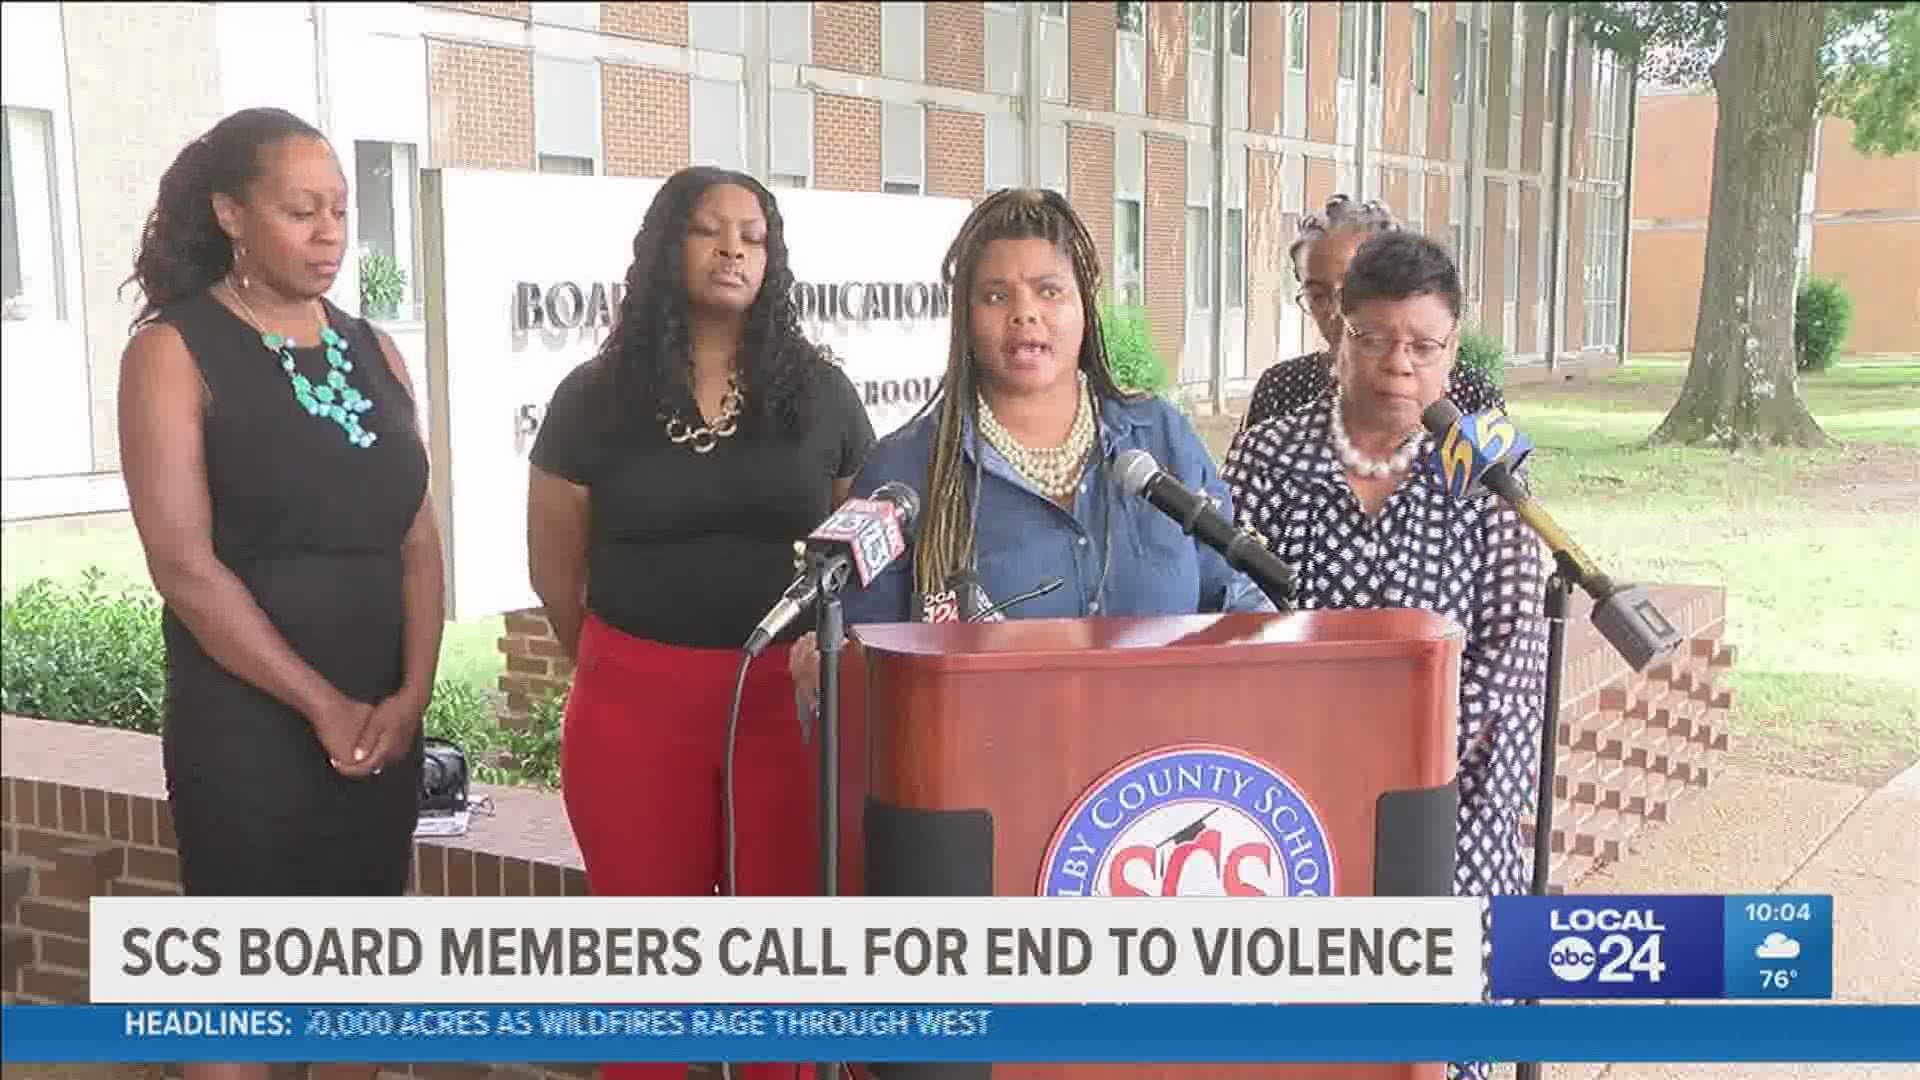 SCS board members want to see more accountability from community organizations in battling this gun violence robbing kids of their futures.